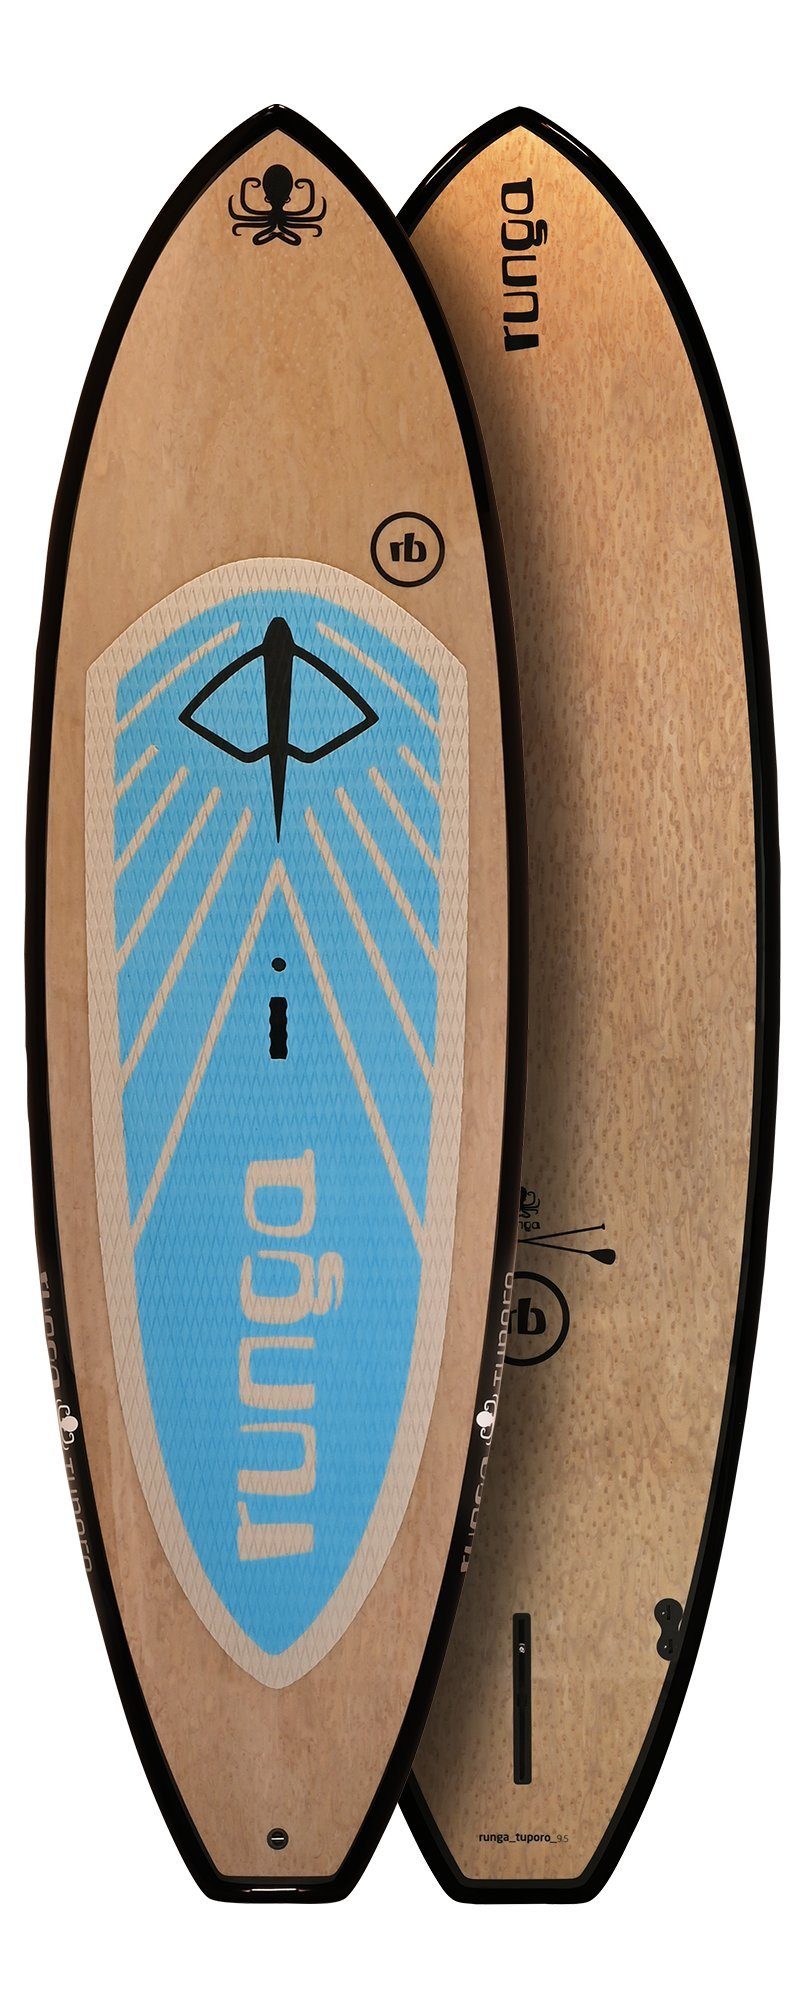 Runga-Boards SUP-Board Runga TUPORO BLUE Hard Board Stand Up Paddling SUP, (10.0, inkl. Coiled Lash & 3-tlg. Finnen-Set)